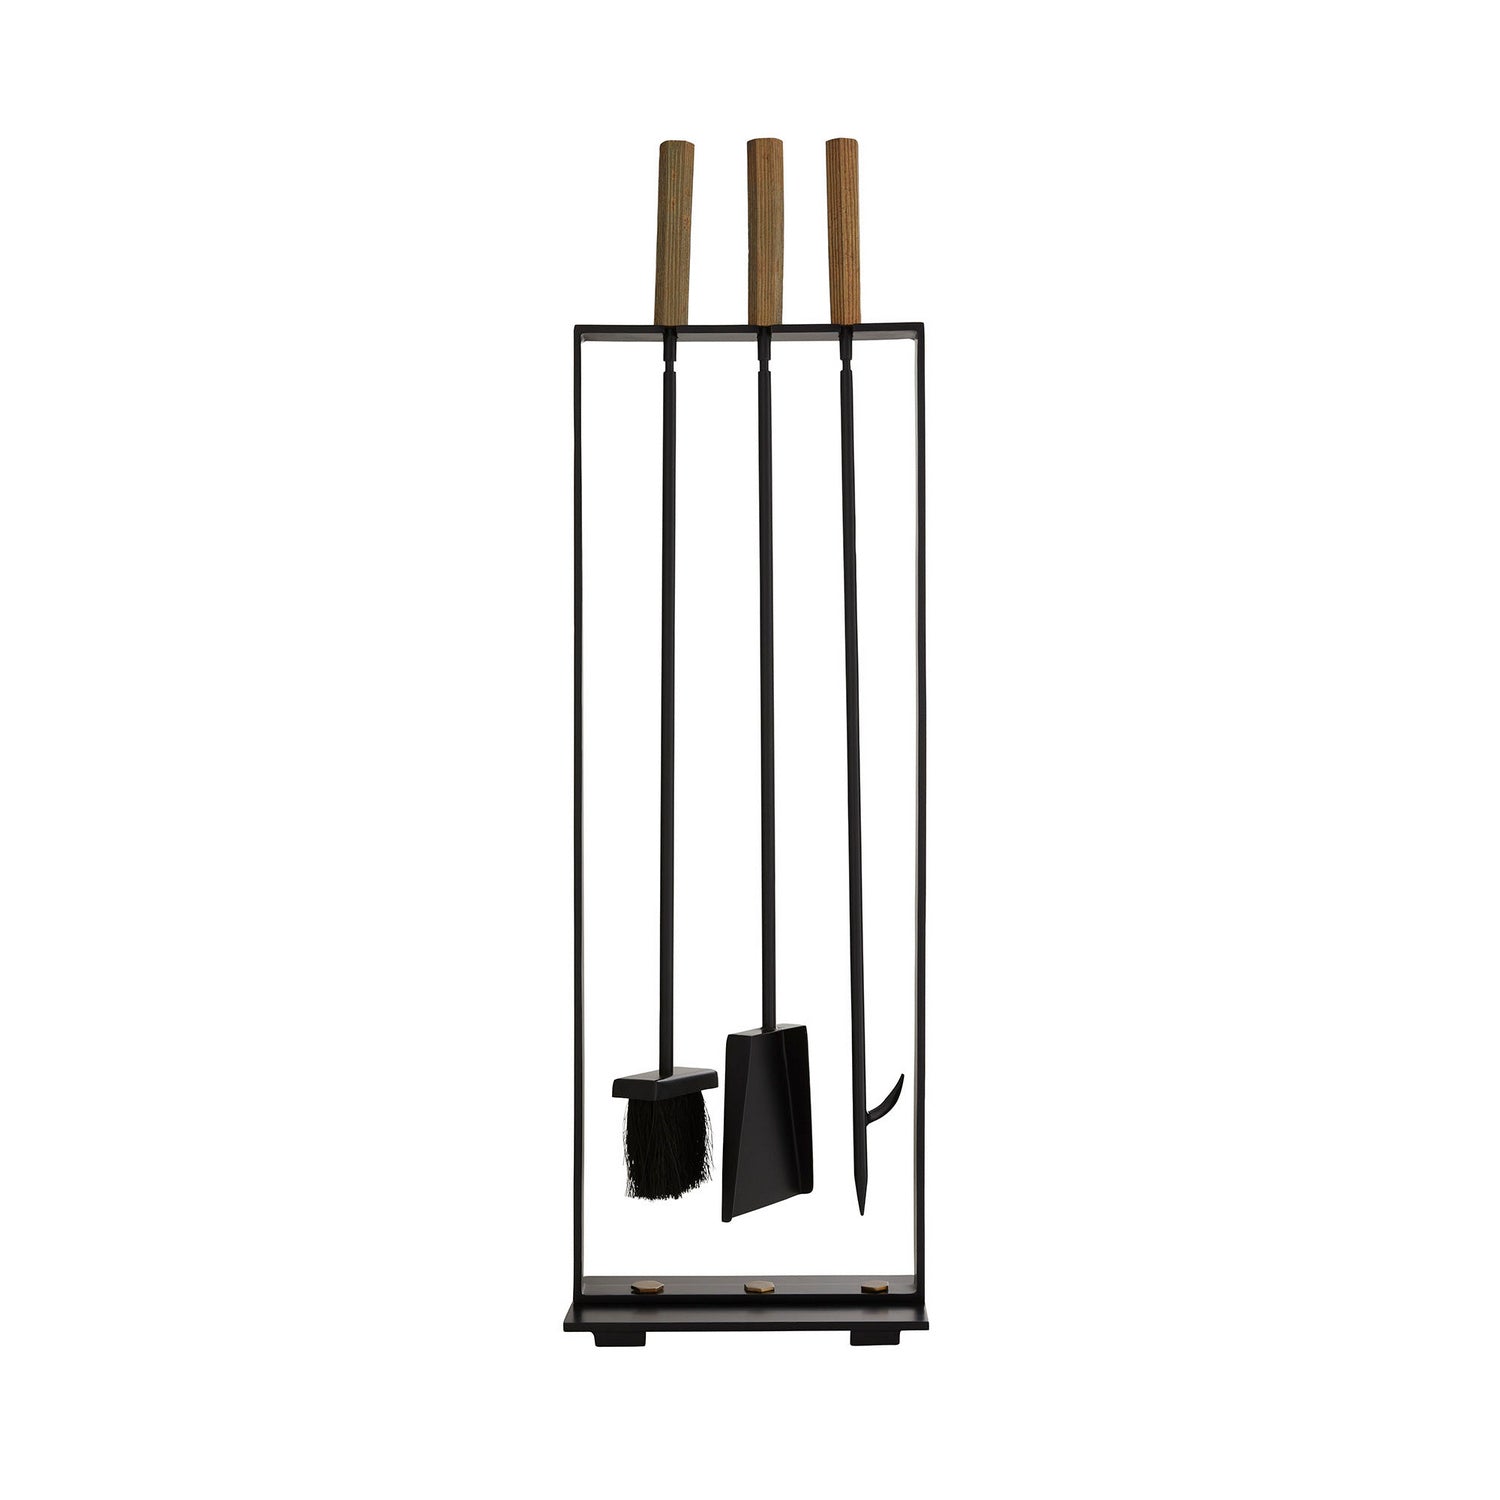 Fireplace Tool Set from the Landt collection in Blackened Iron finish